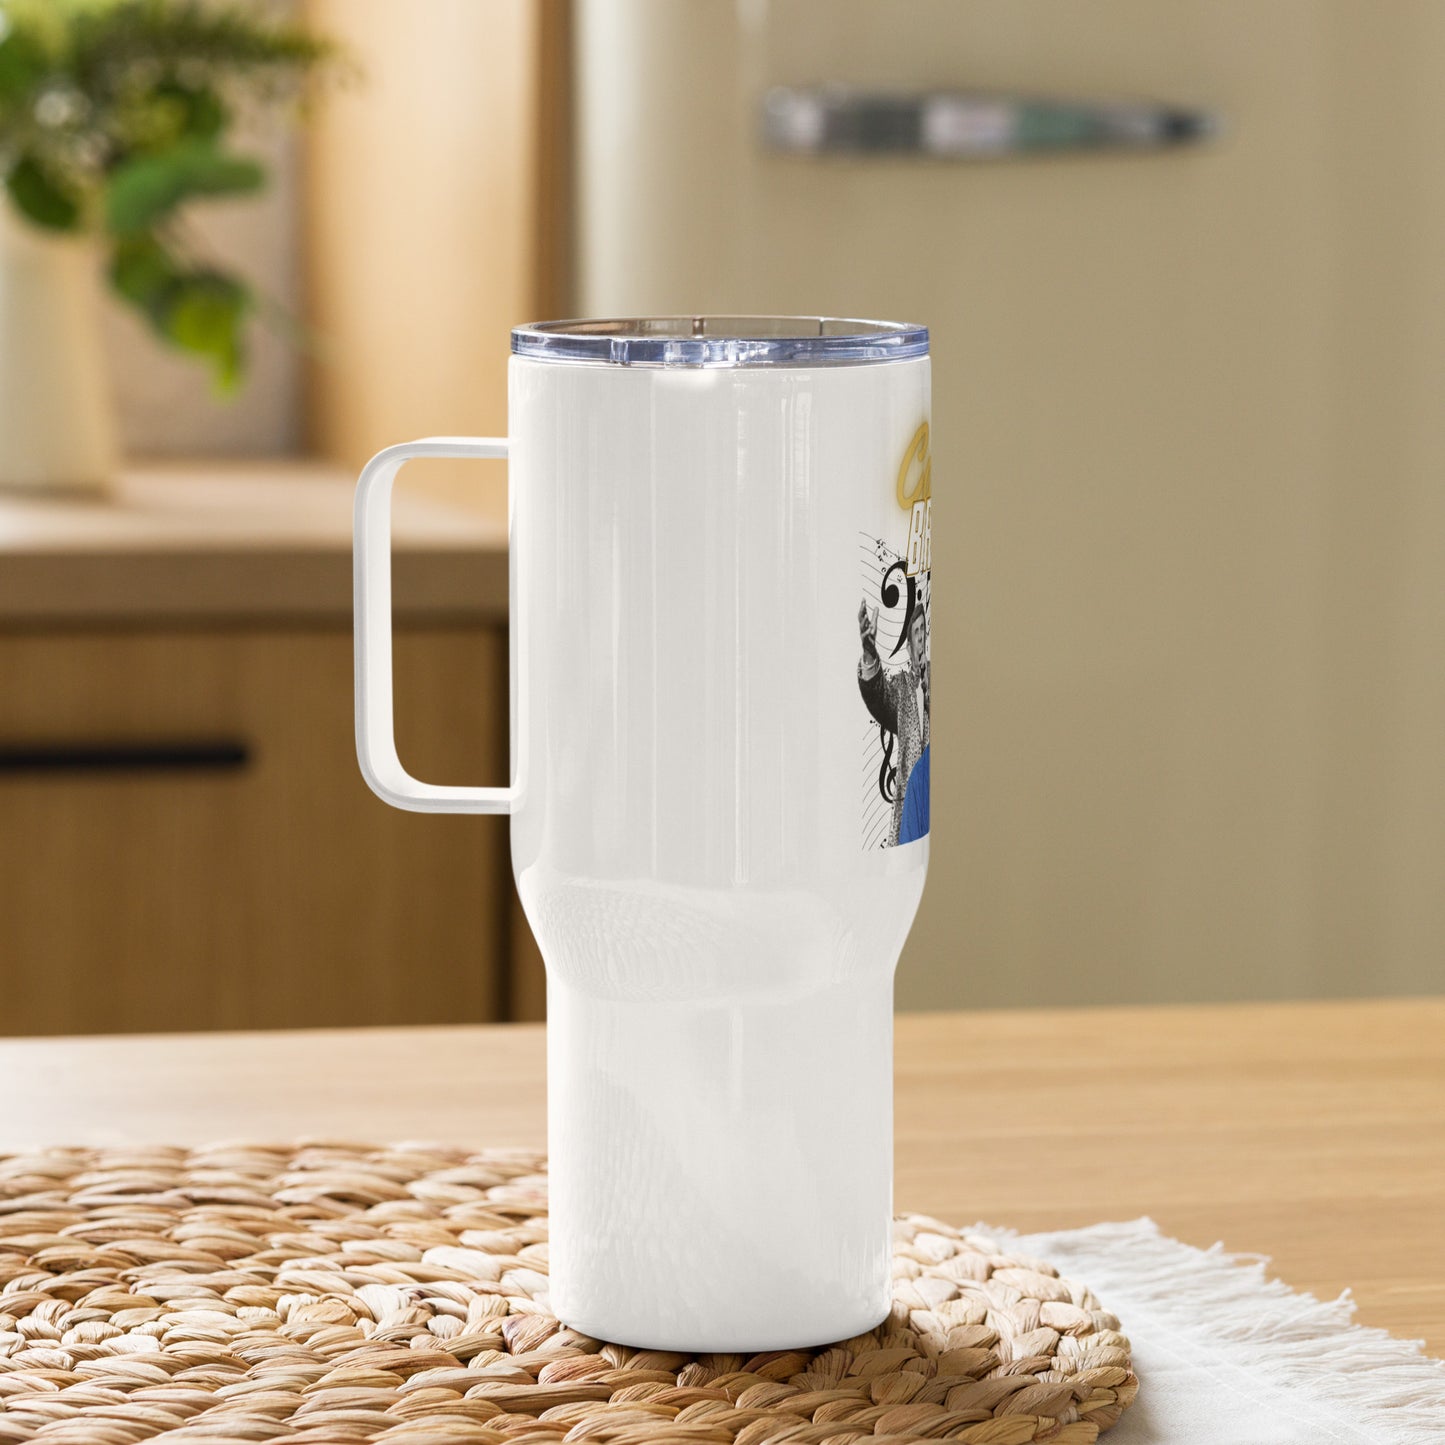 Cousin Brucie Travel mug with a handle